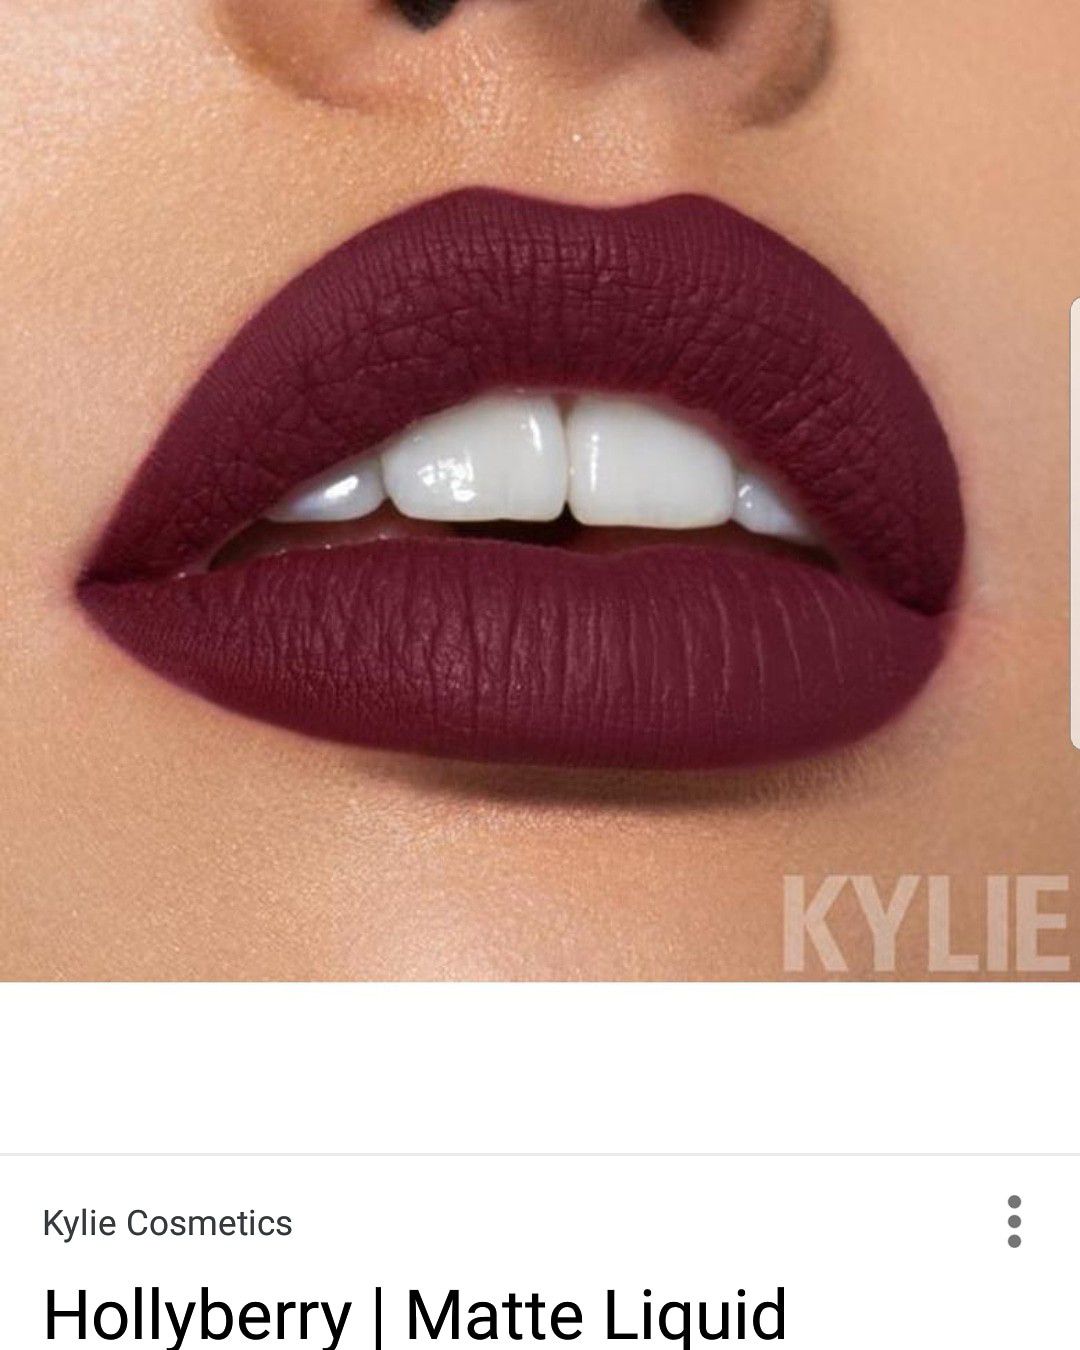 Hollyberry lip kit by kylie